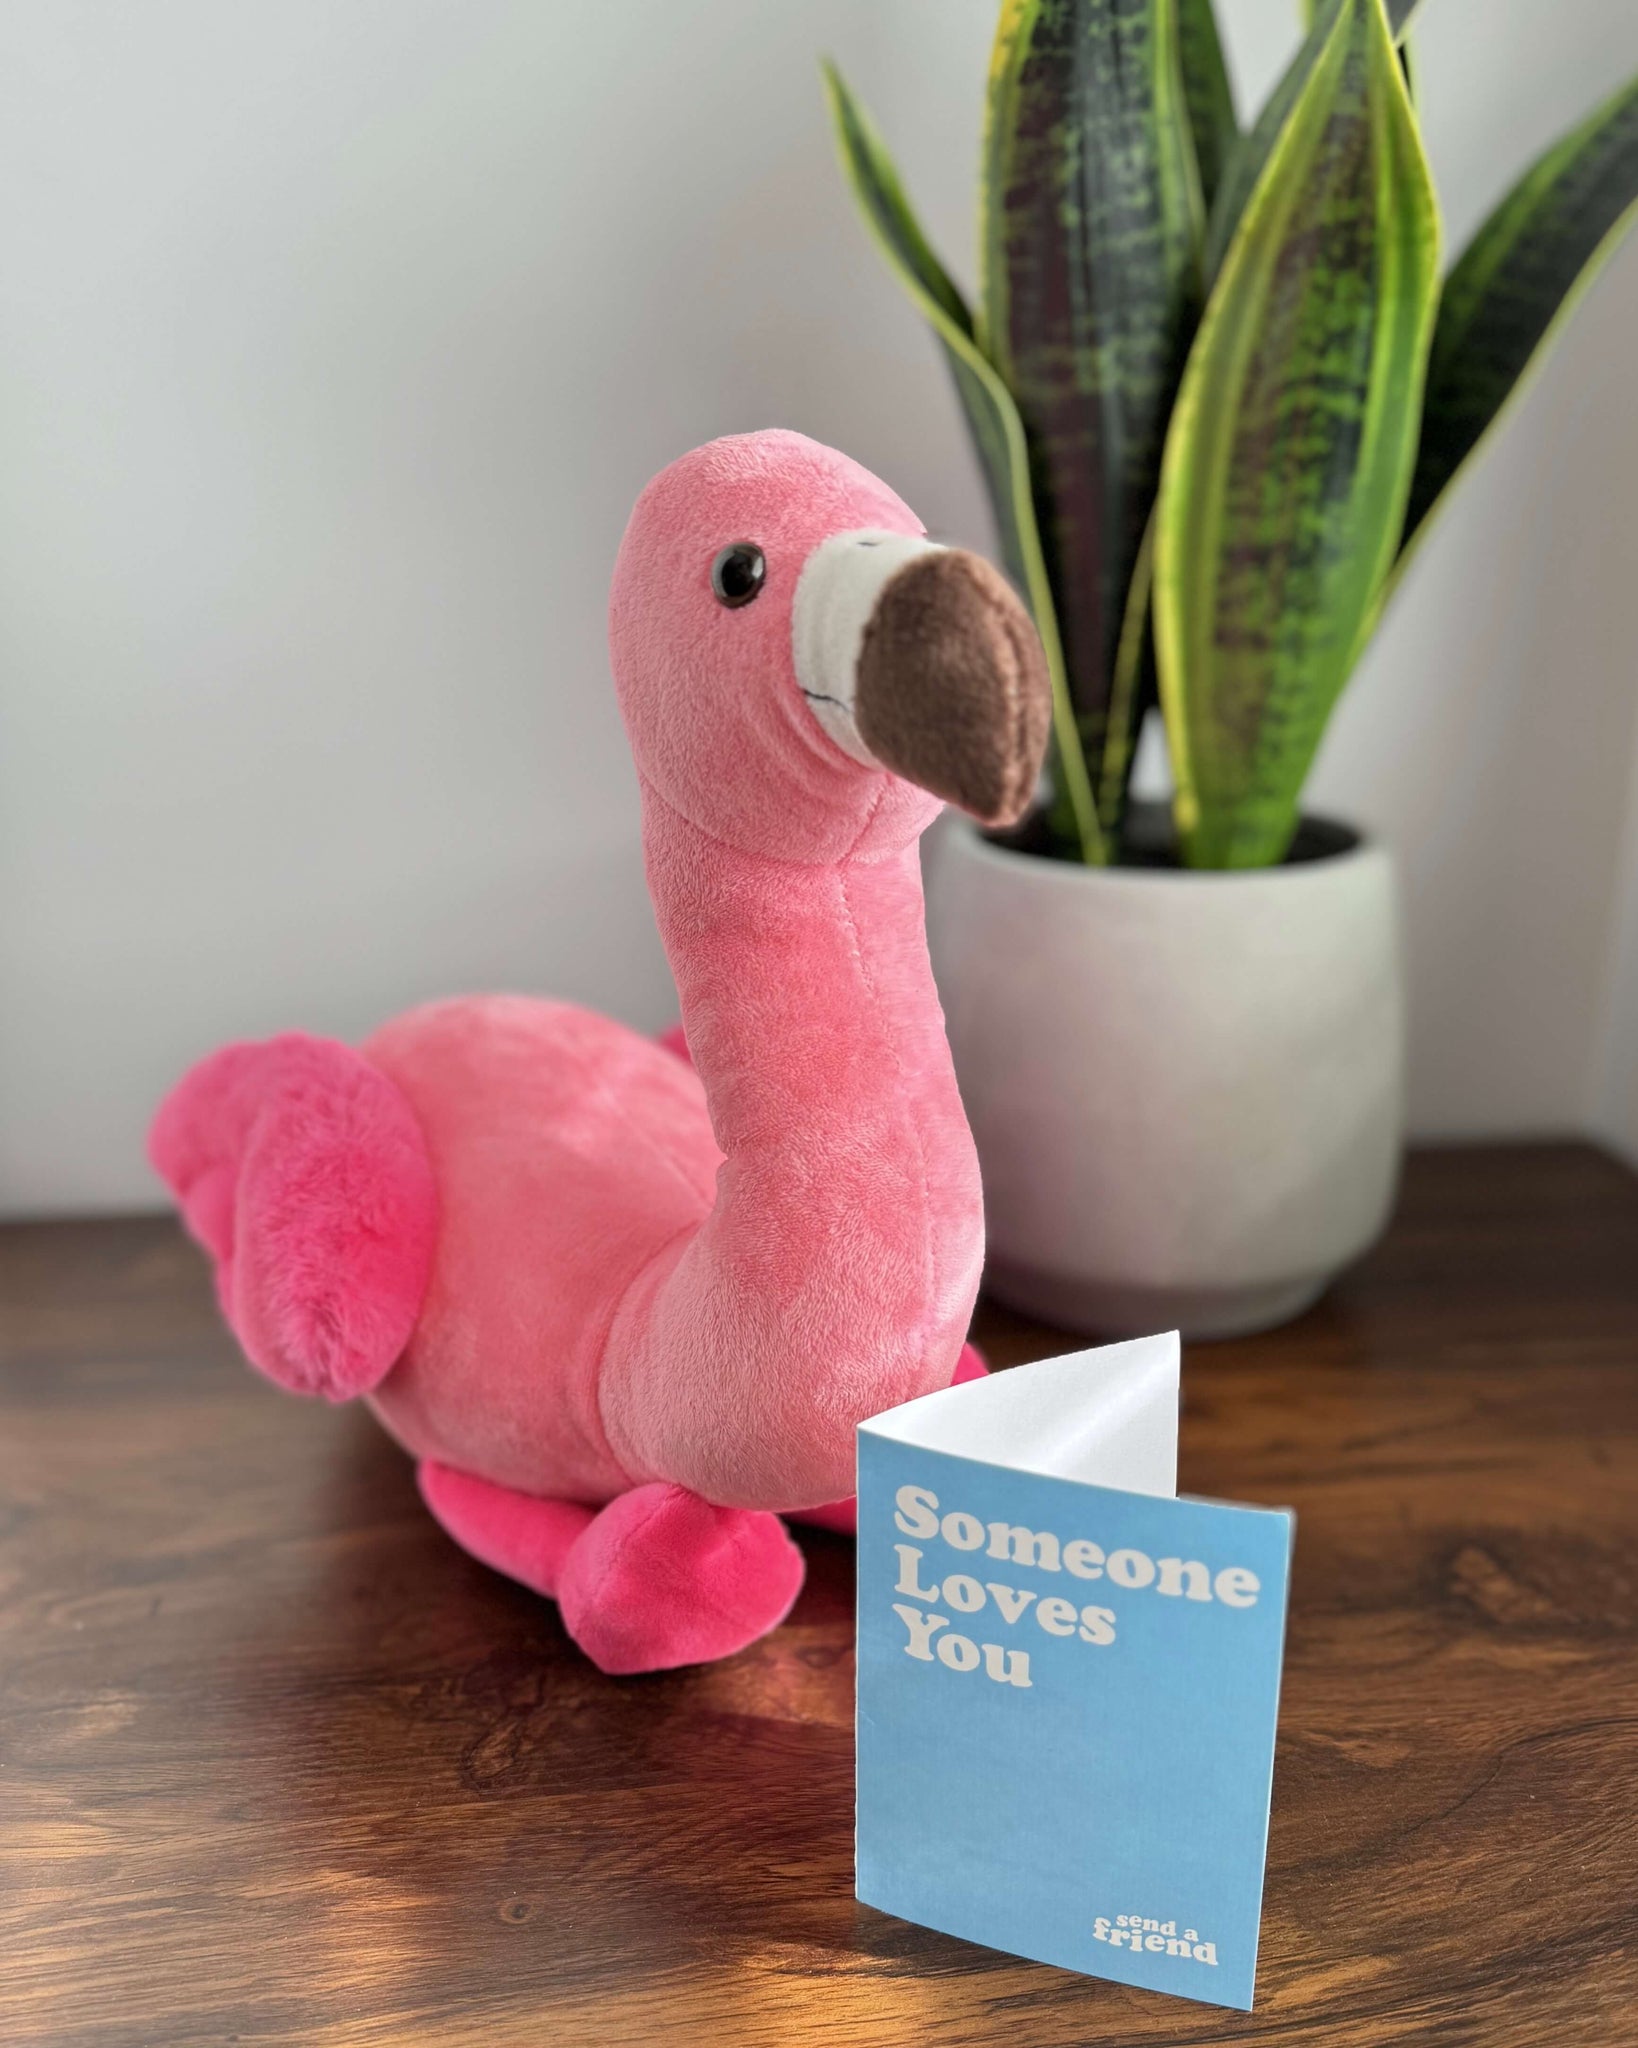 Photo of pink Faye the Flamingo sitting on a wood table with note card and a plant